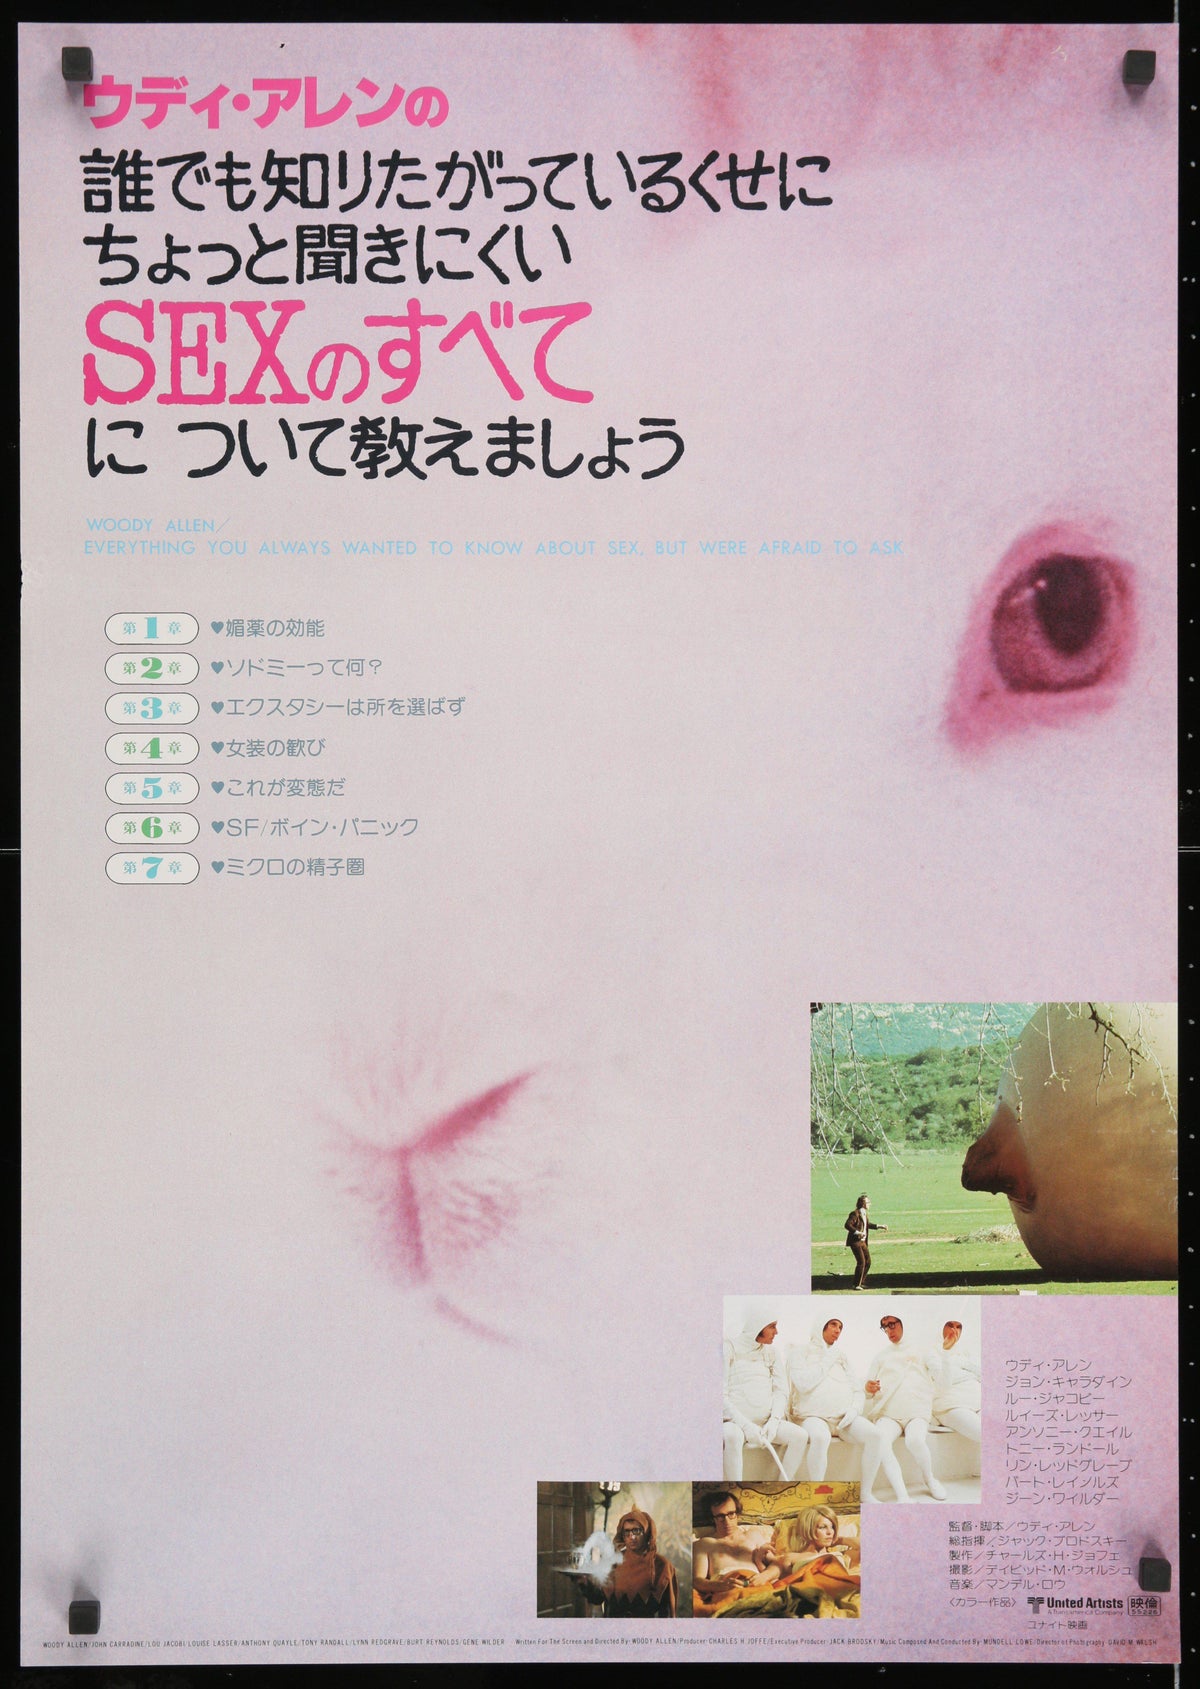 Everything You Always Wanted to Know About Sex.. Japanese 1 panel (20x29) Original Vintage Movie Poster